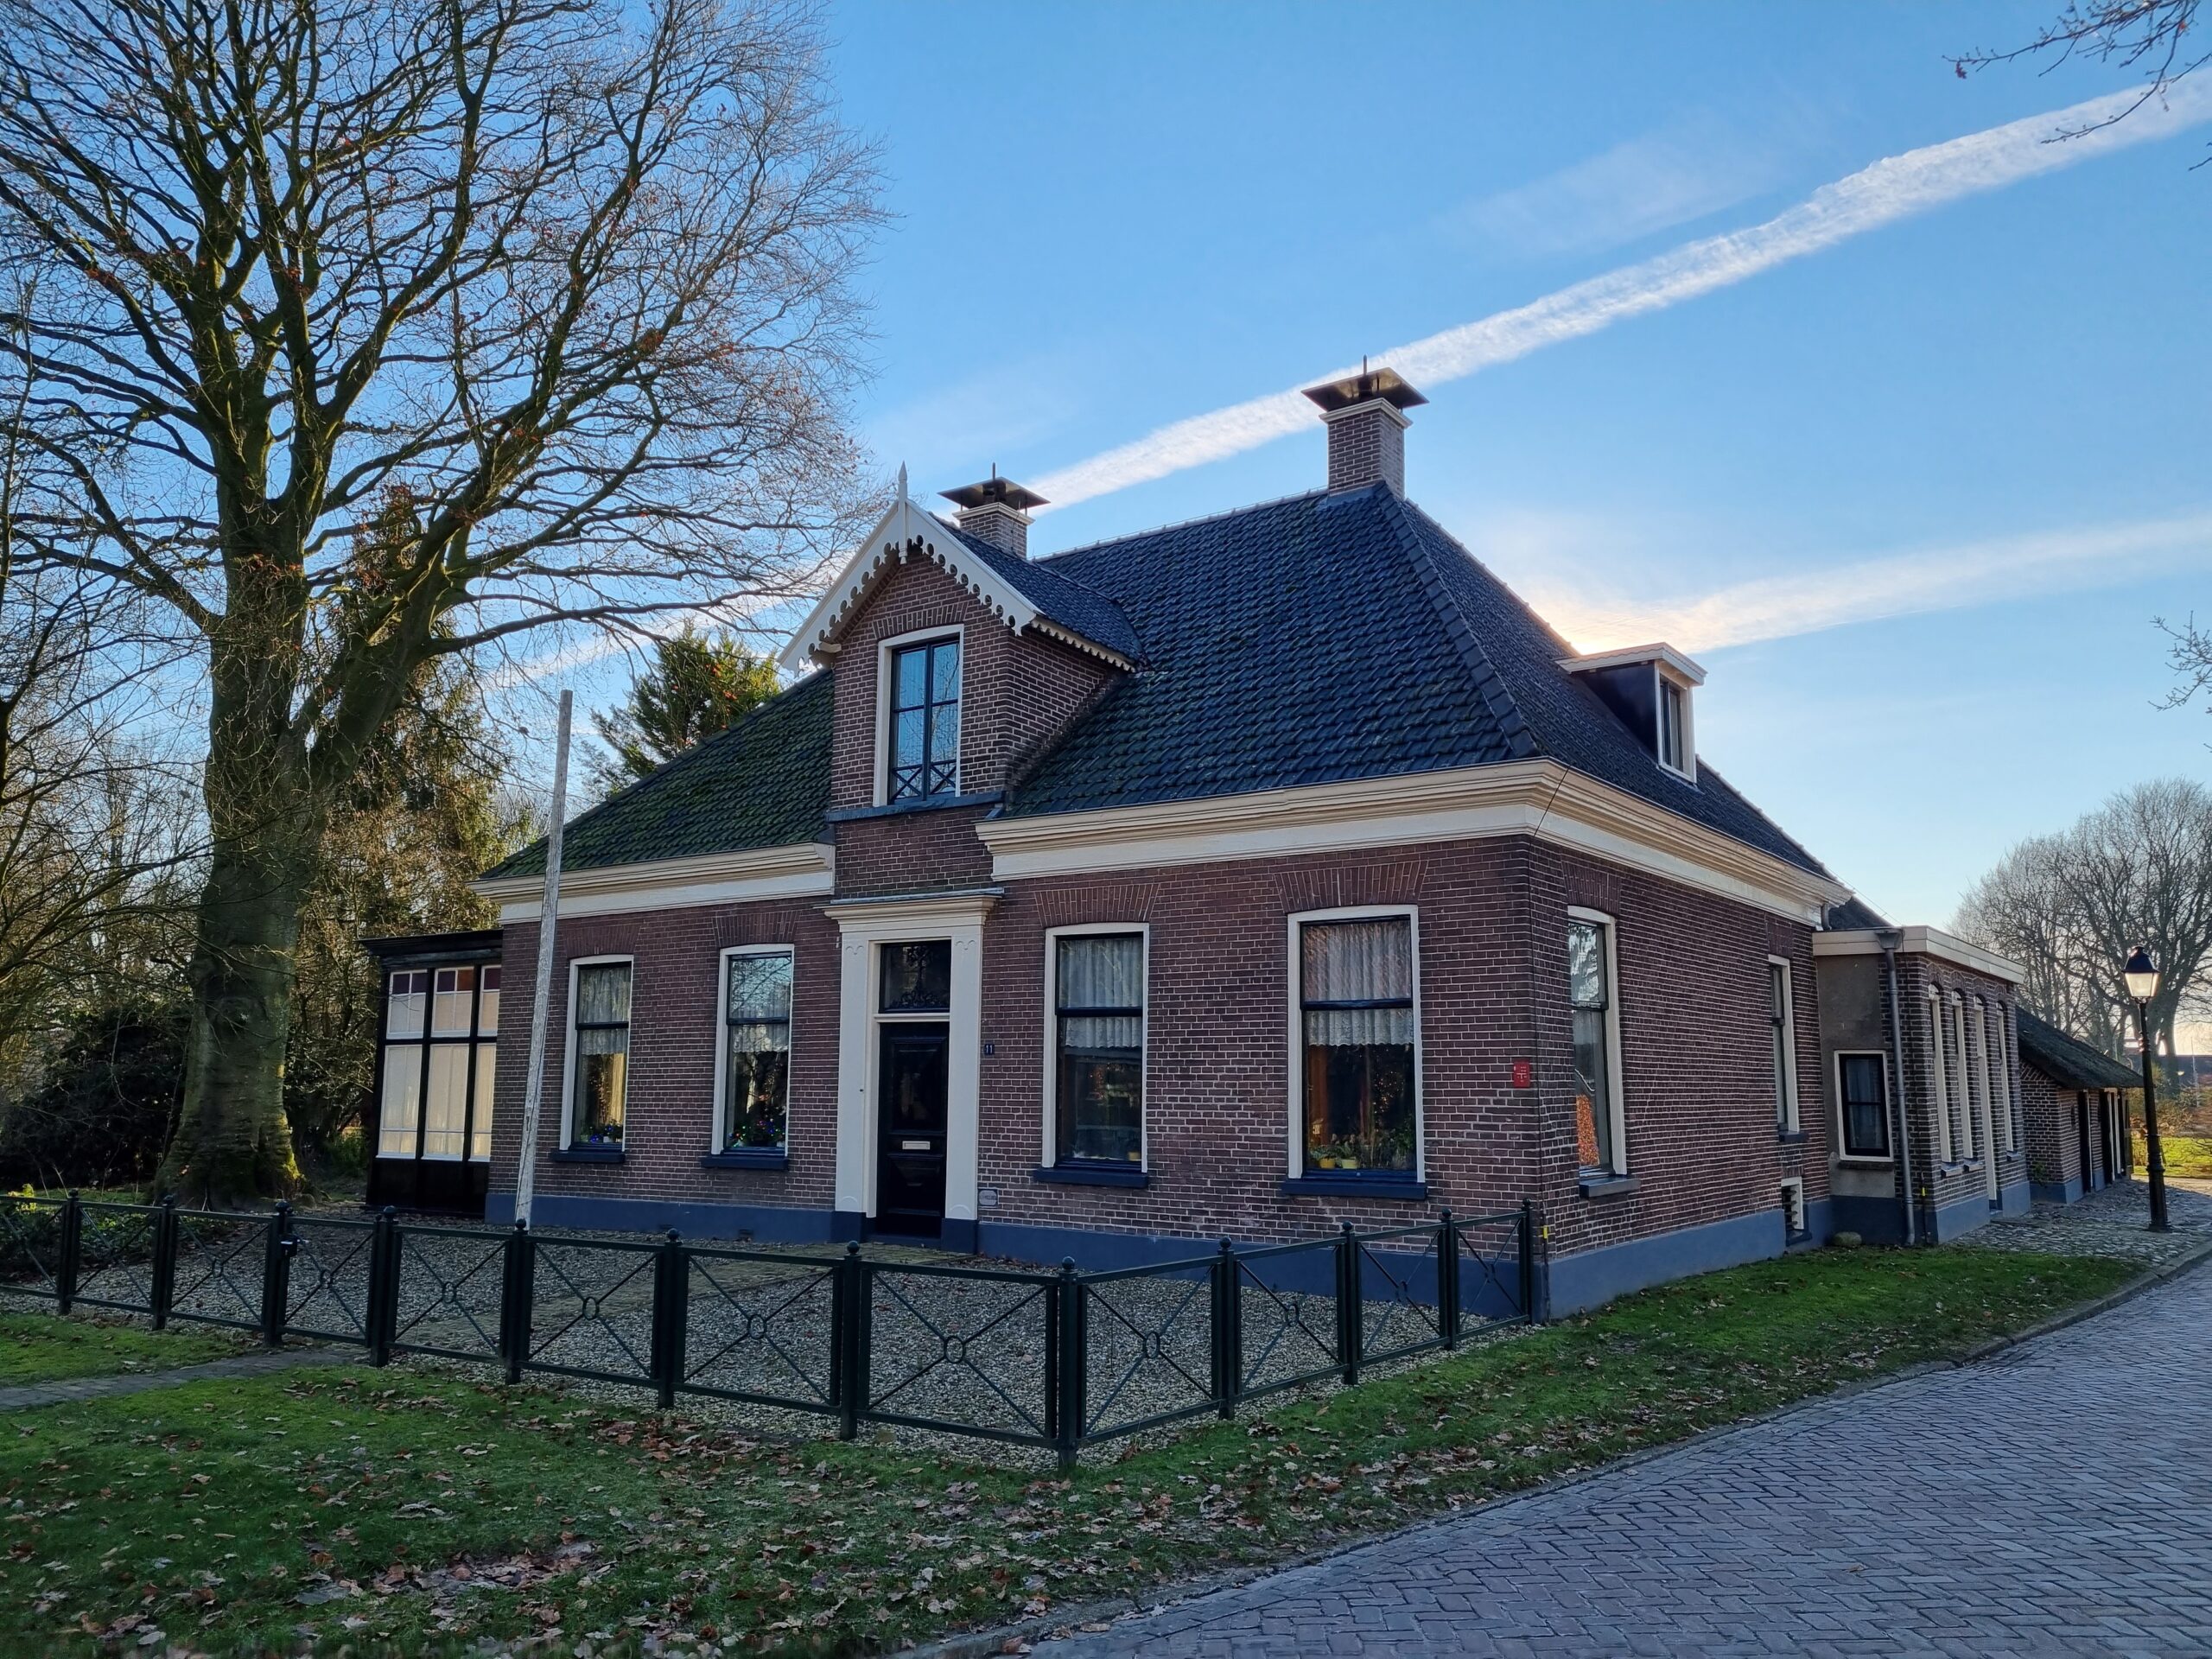 Zwerftocht om Diever - Provinciaal monument